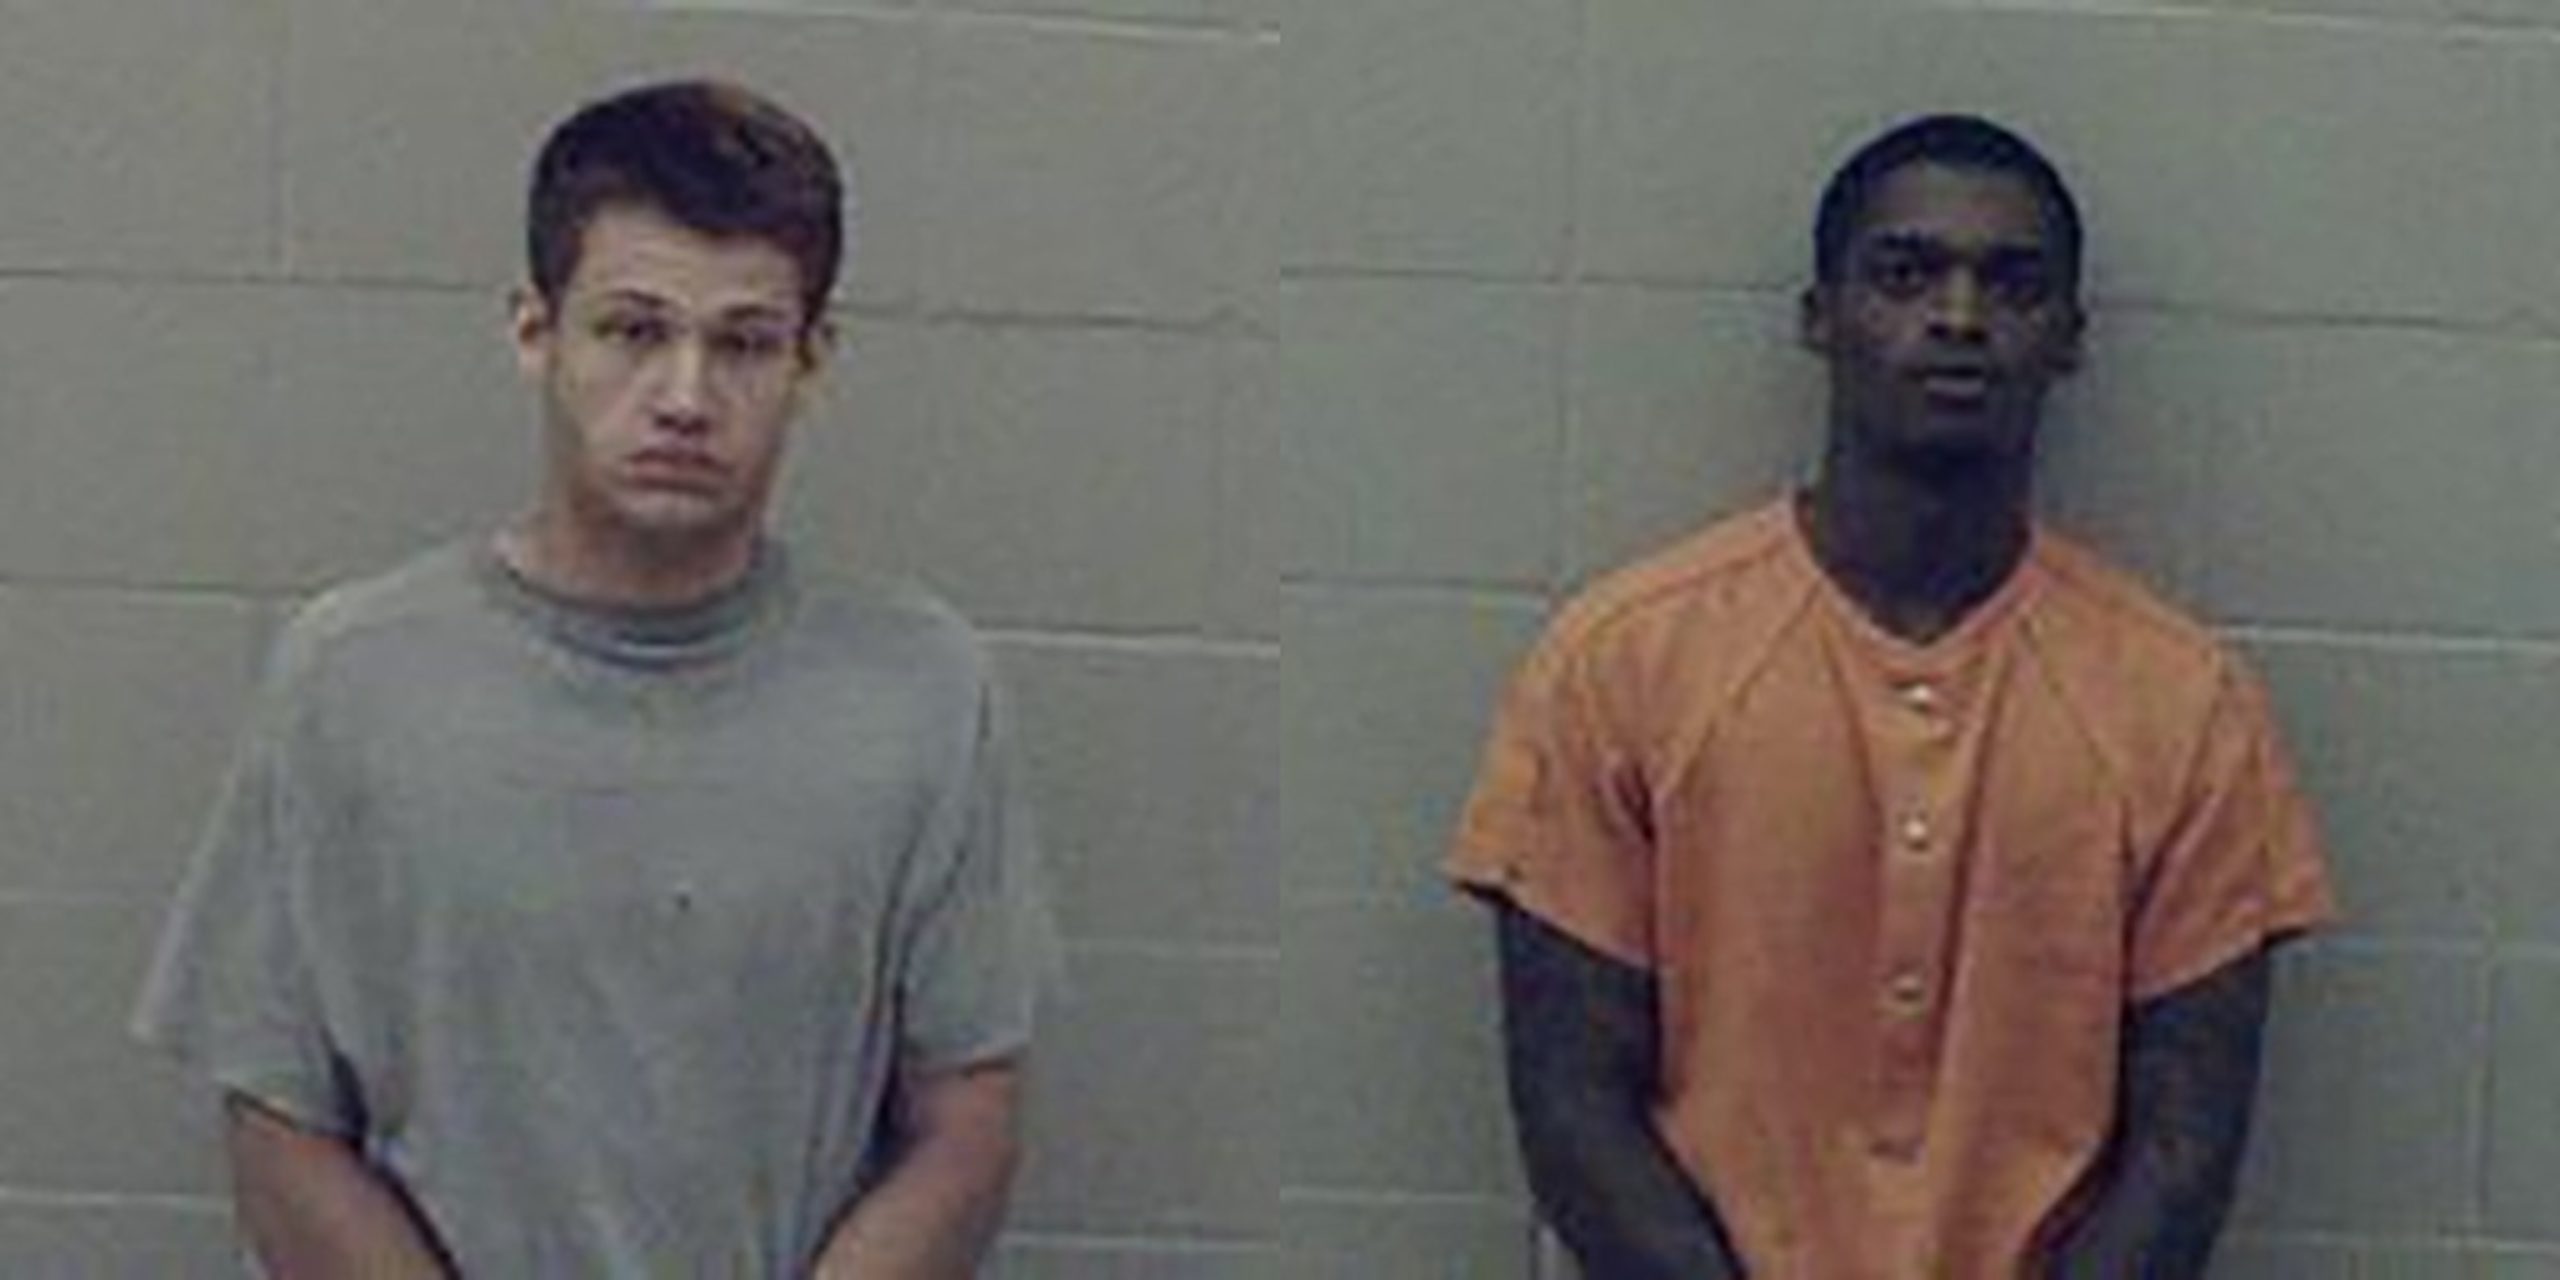 Two murder suspects on the loose after escaping from Arkansas jail: Authorities launch search operation